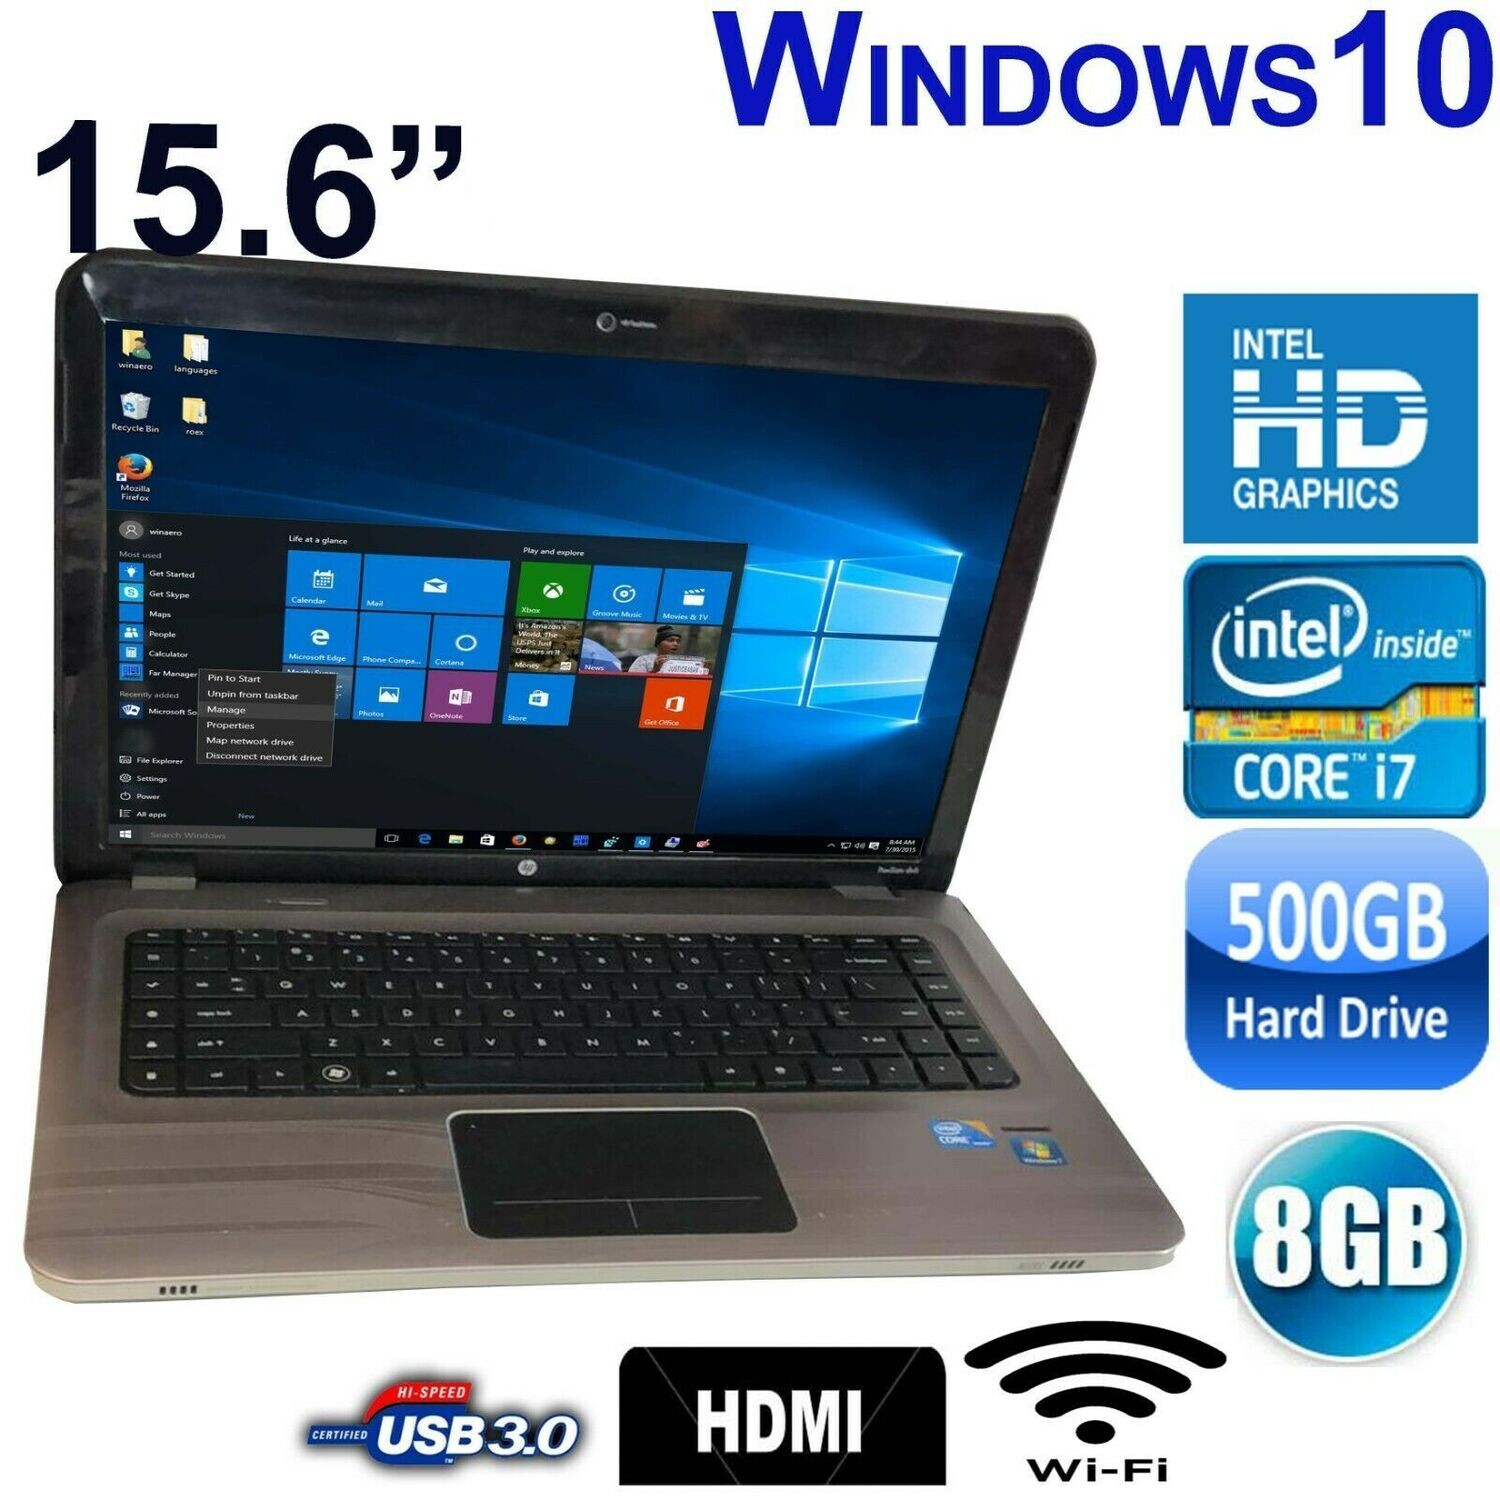 HP Pavilion DV6 i7 1.6 GHz 8 GB 500 GB HDD-15.6" HD Graphics Notebook Laptop Win10 PRO